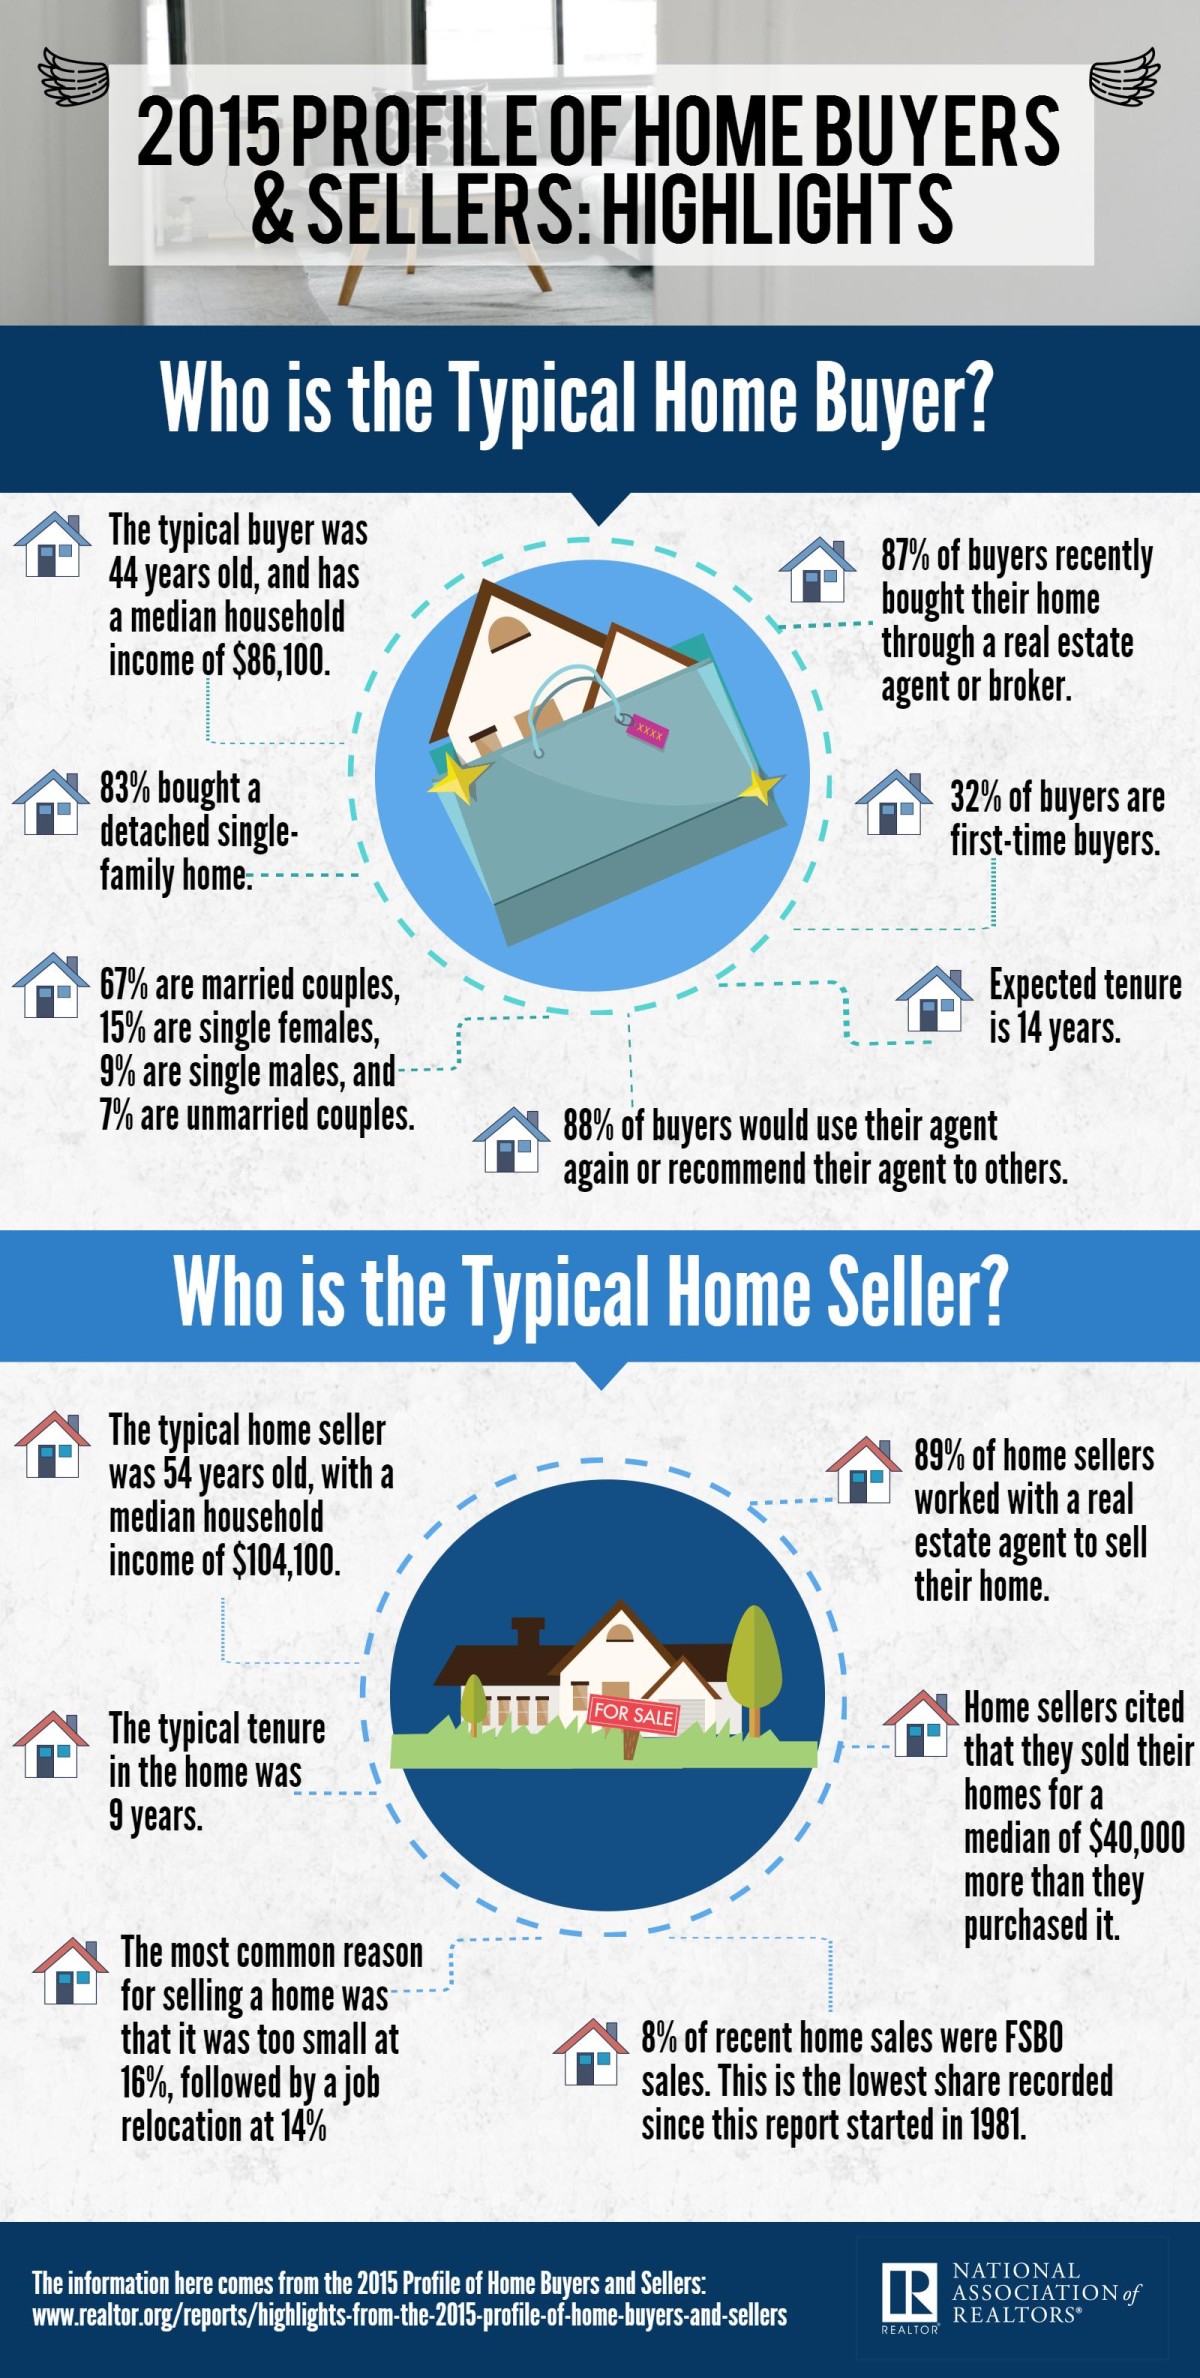 Here’s what the typical homebuyer and seller look like